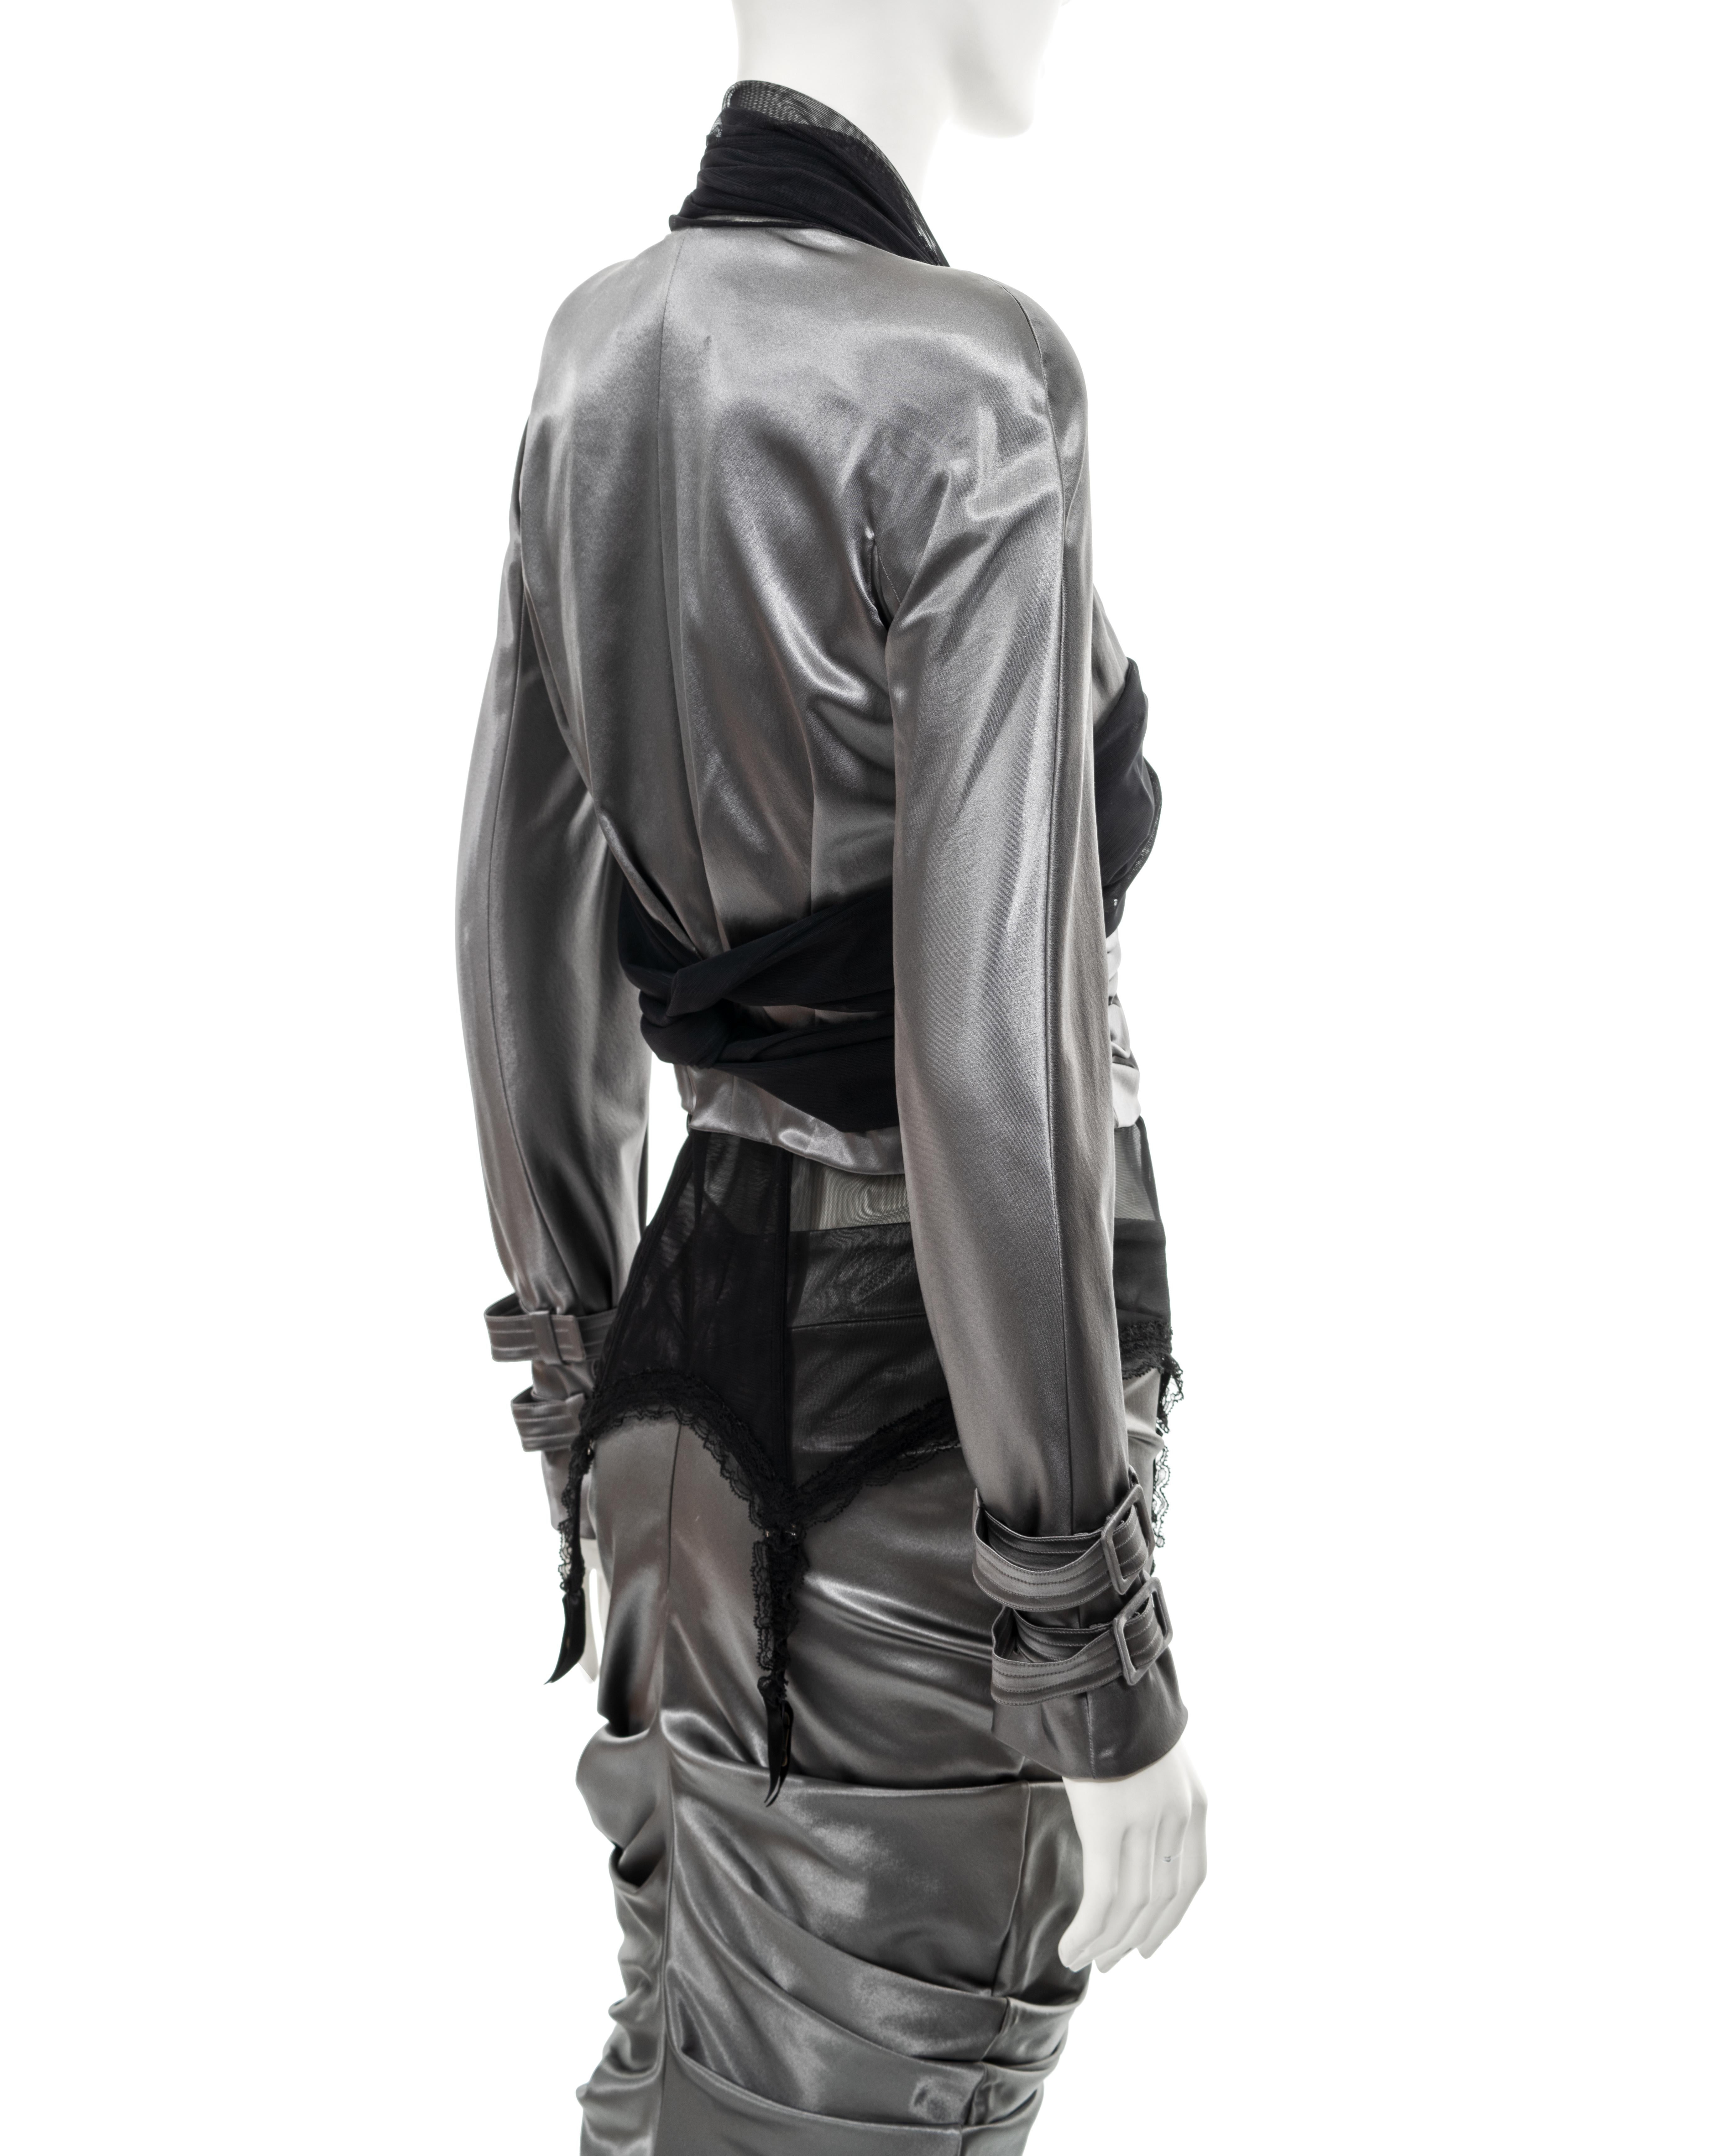 Christian Dior by John Galliano silver-grey stretch satin skirt suit, ss 2004 7